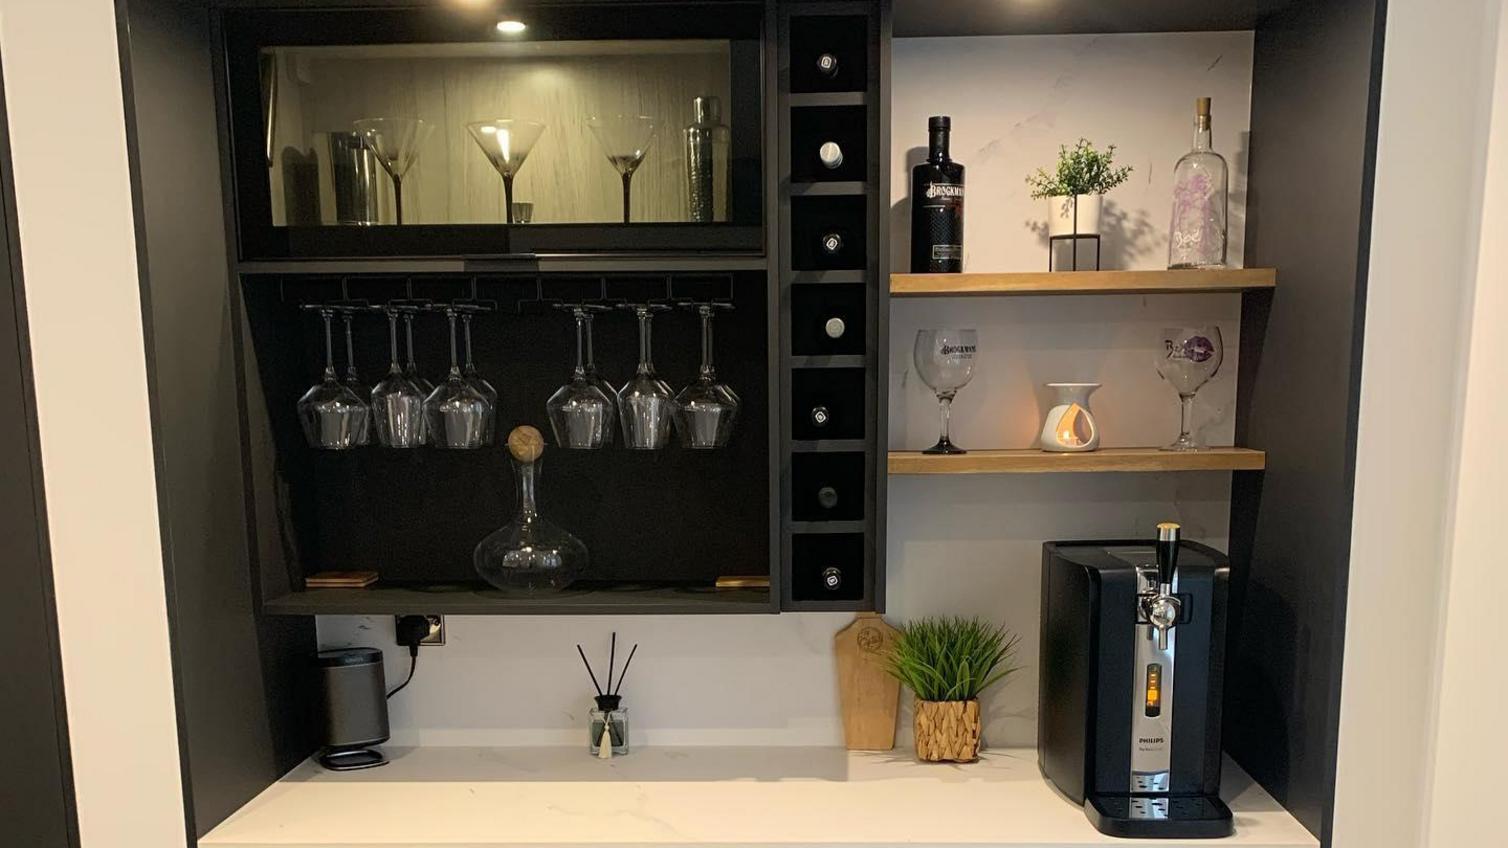 At-home bar idea with dark navy handleless doors, a white marble worktop, and open shelving showing wine glasses.